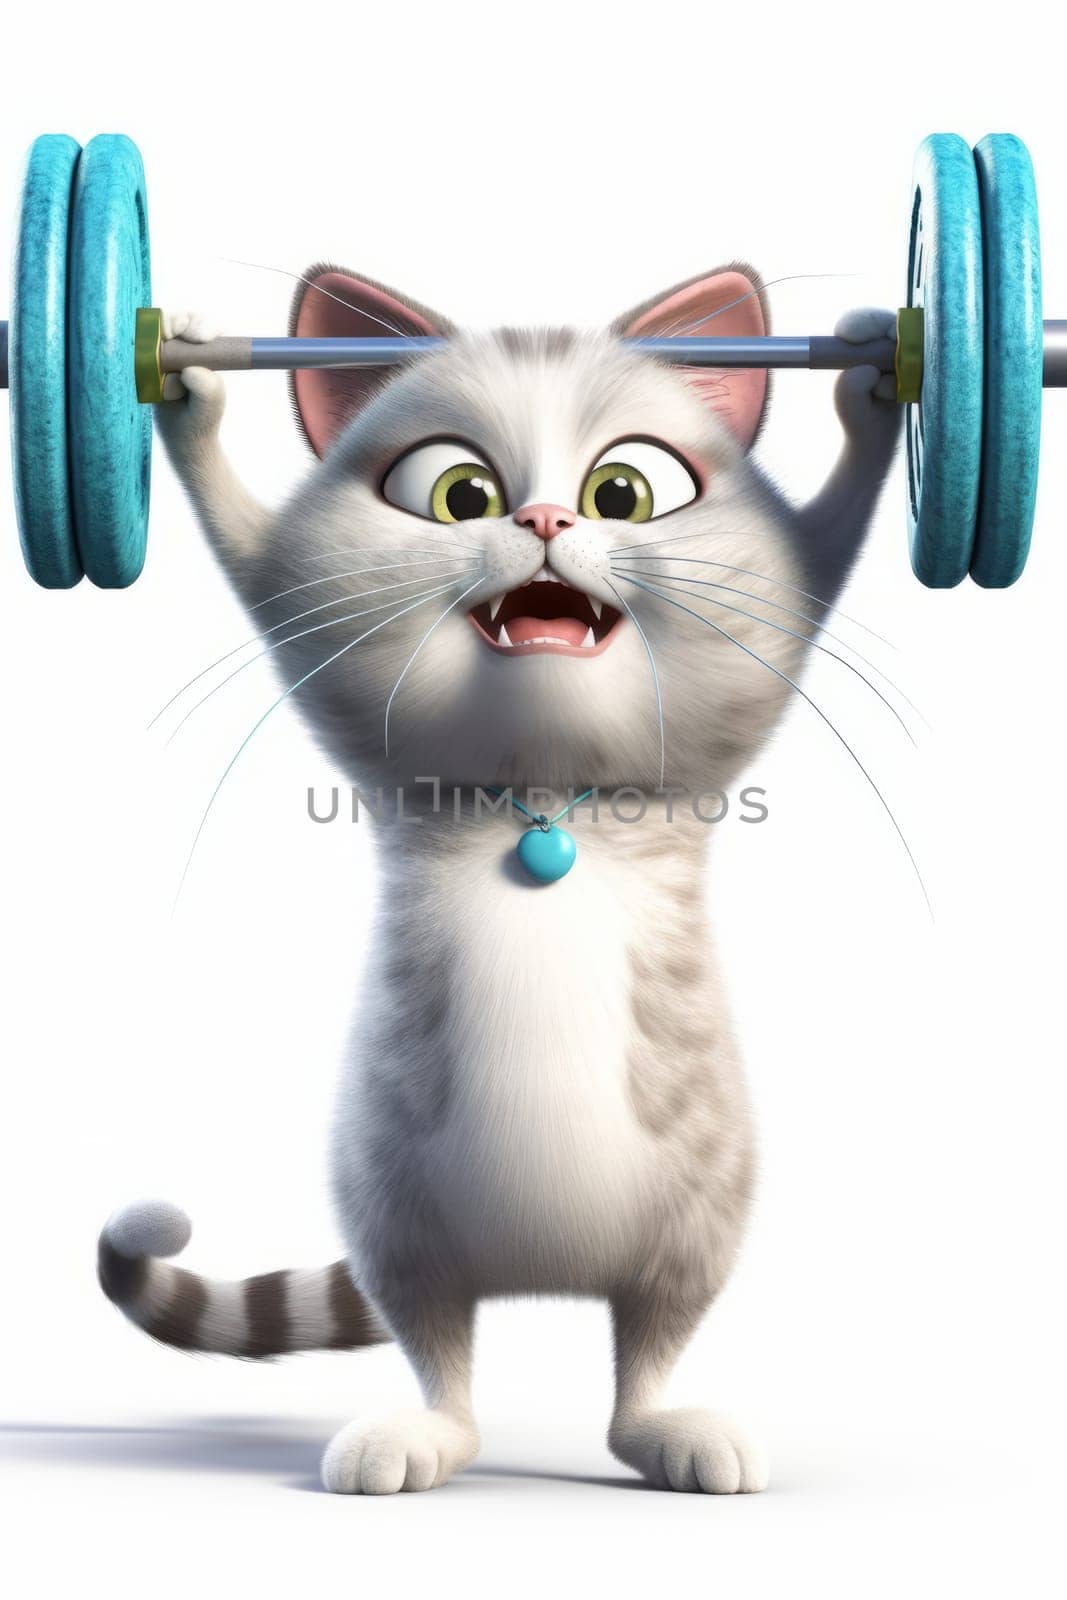 Funny cartoon kitten lifts a blue barbell standing on a white background.